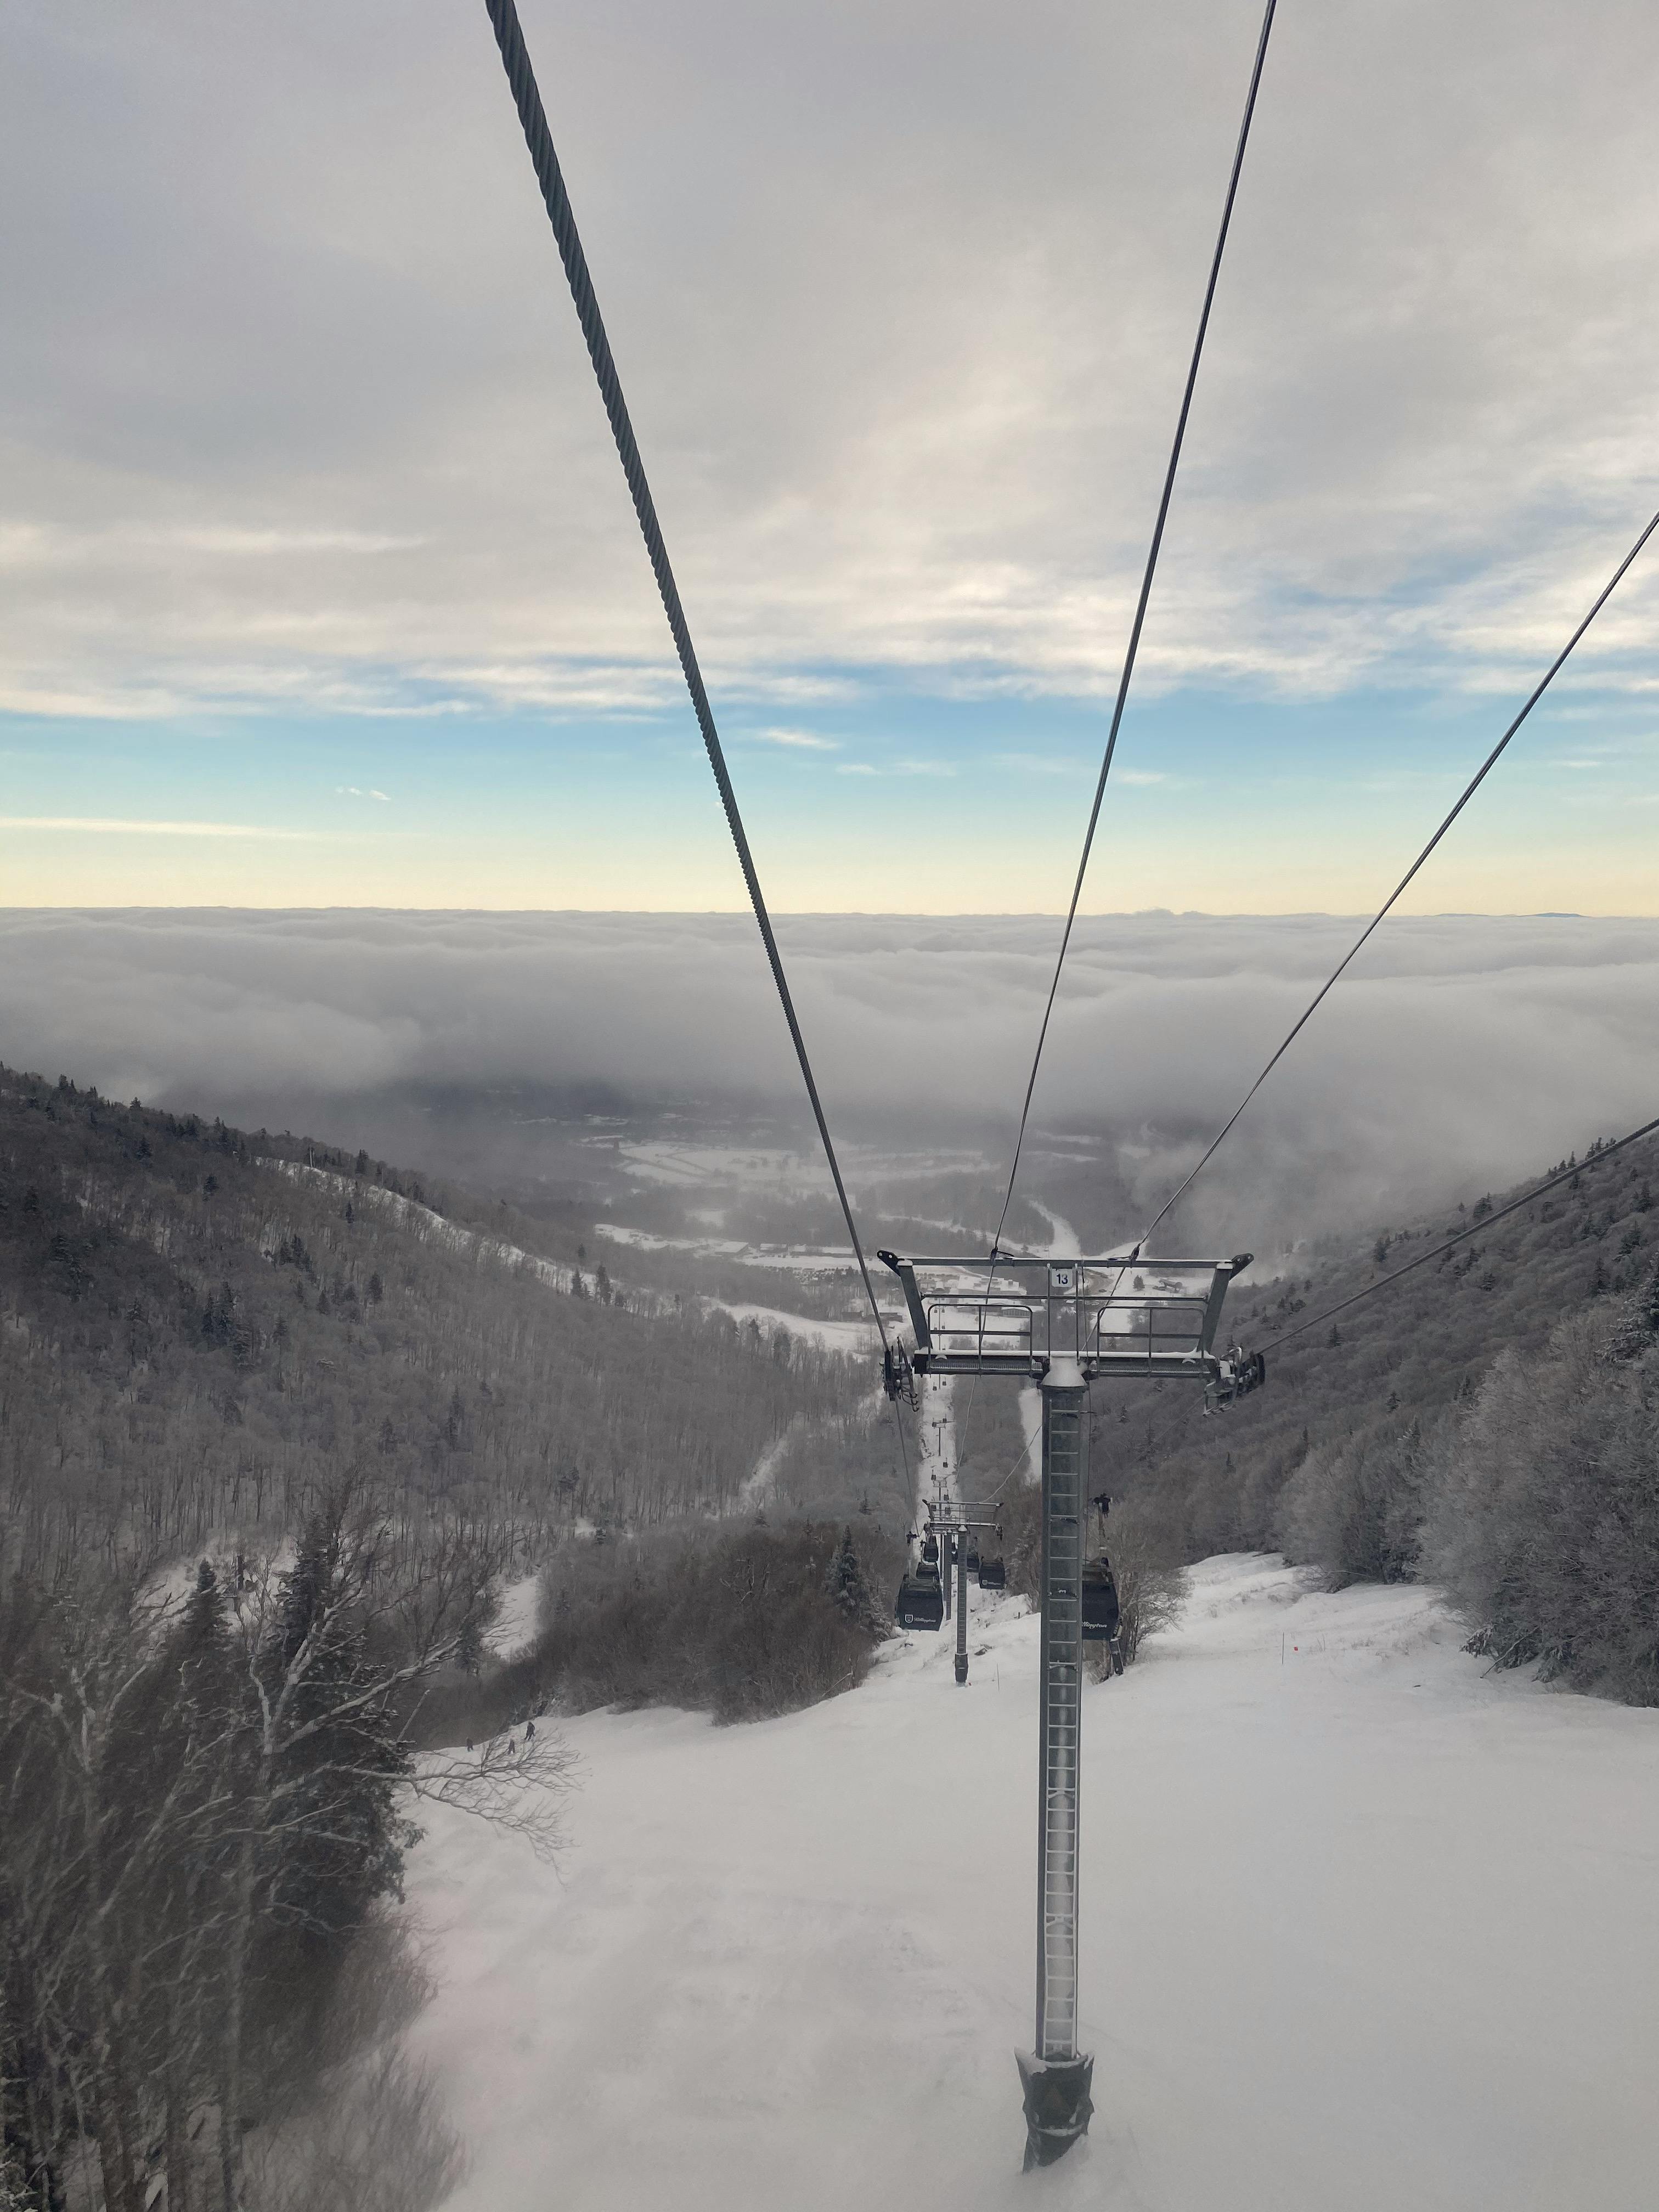 View looking down the ski hill from the gondola. 